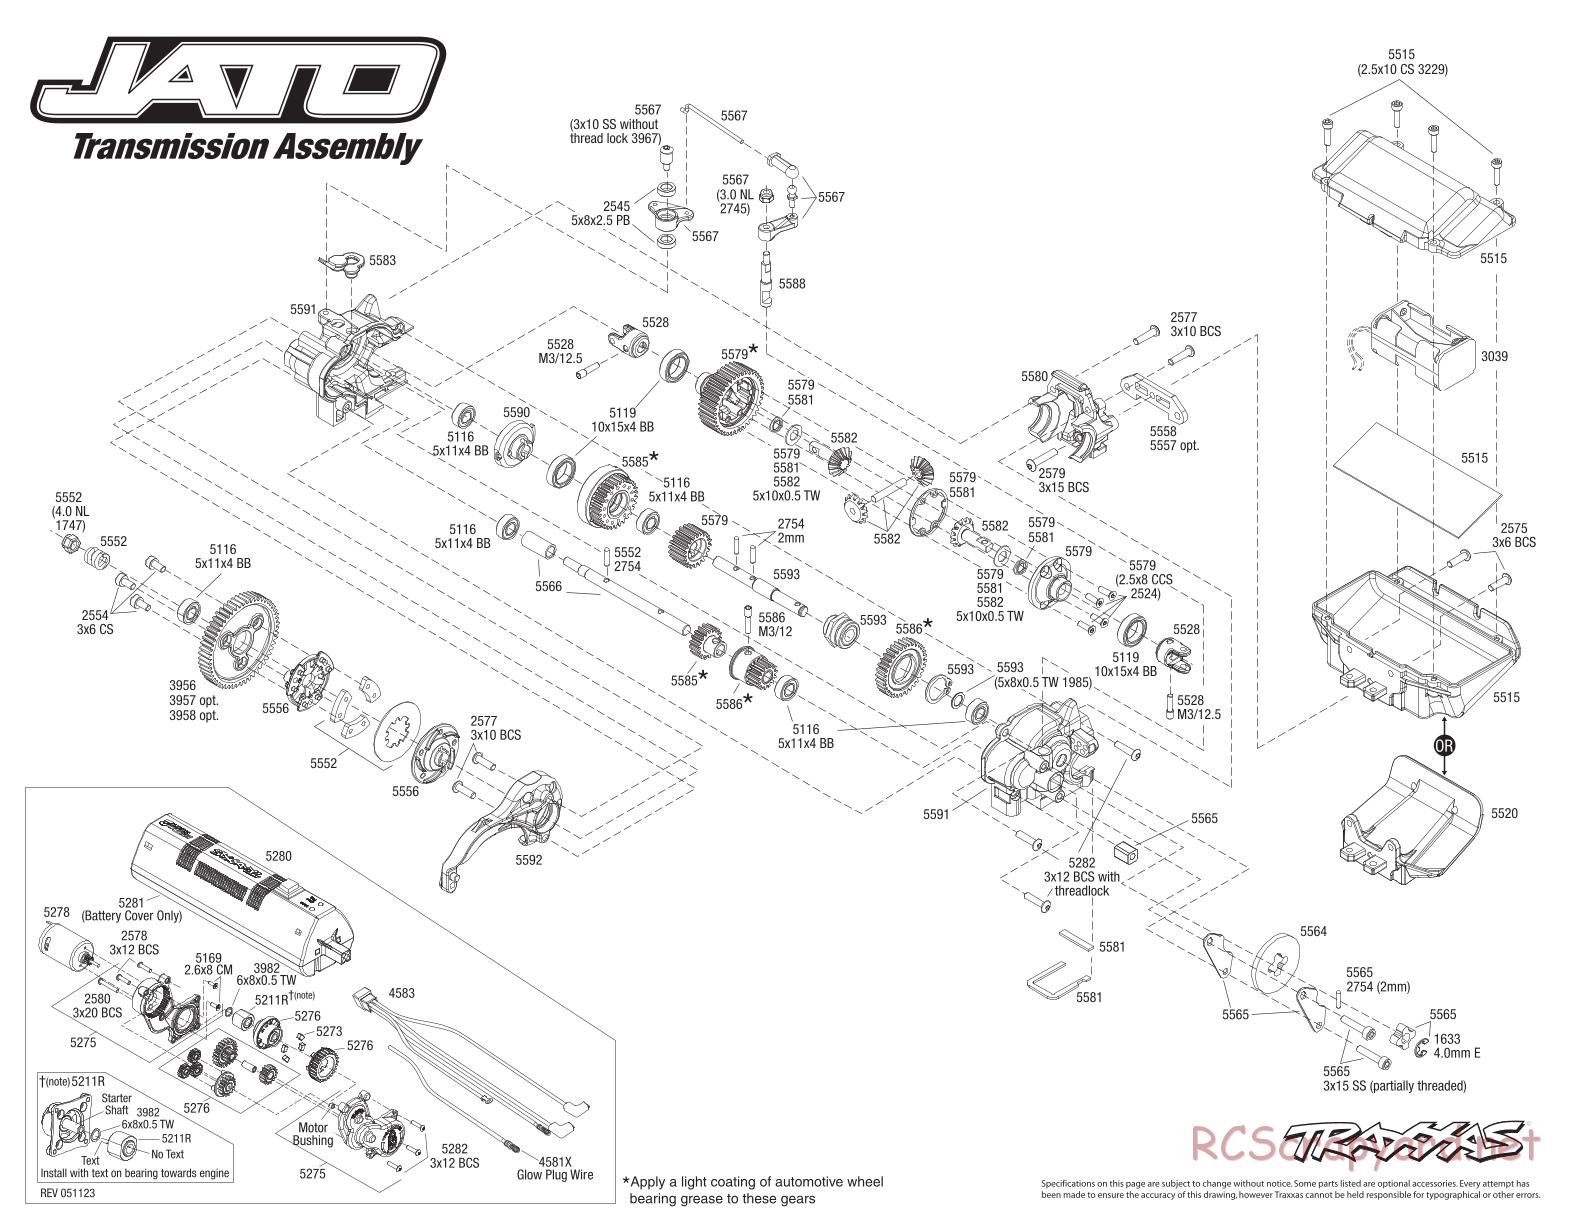 Traxxas - Jato 2.5 (2005) - Exploded Views - Page 4